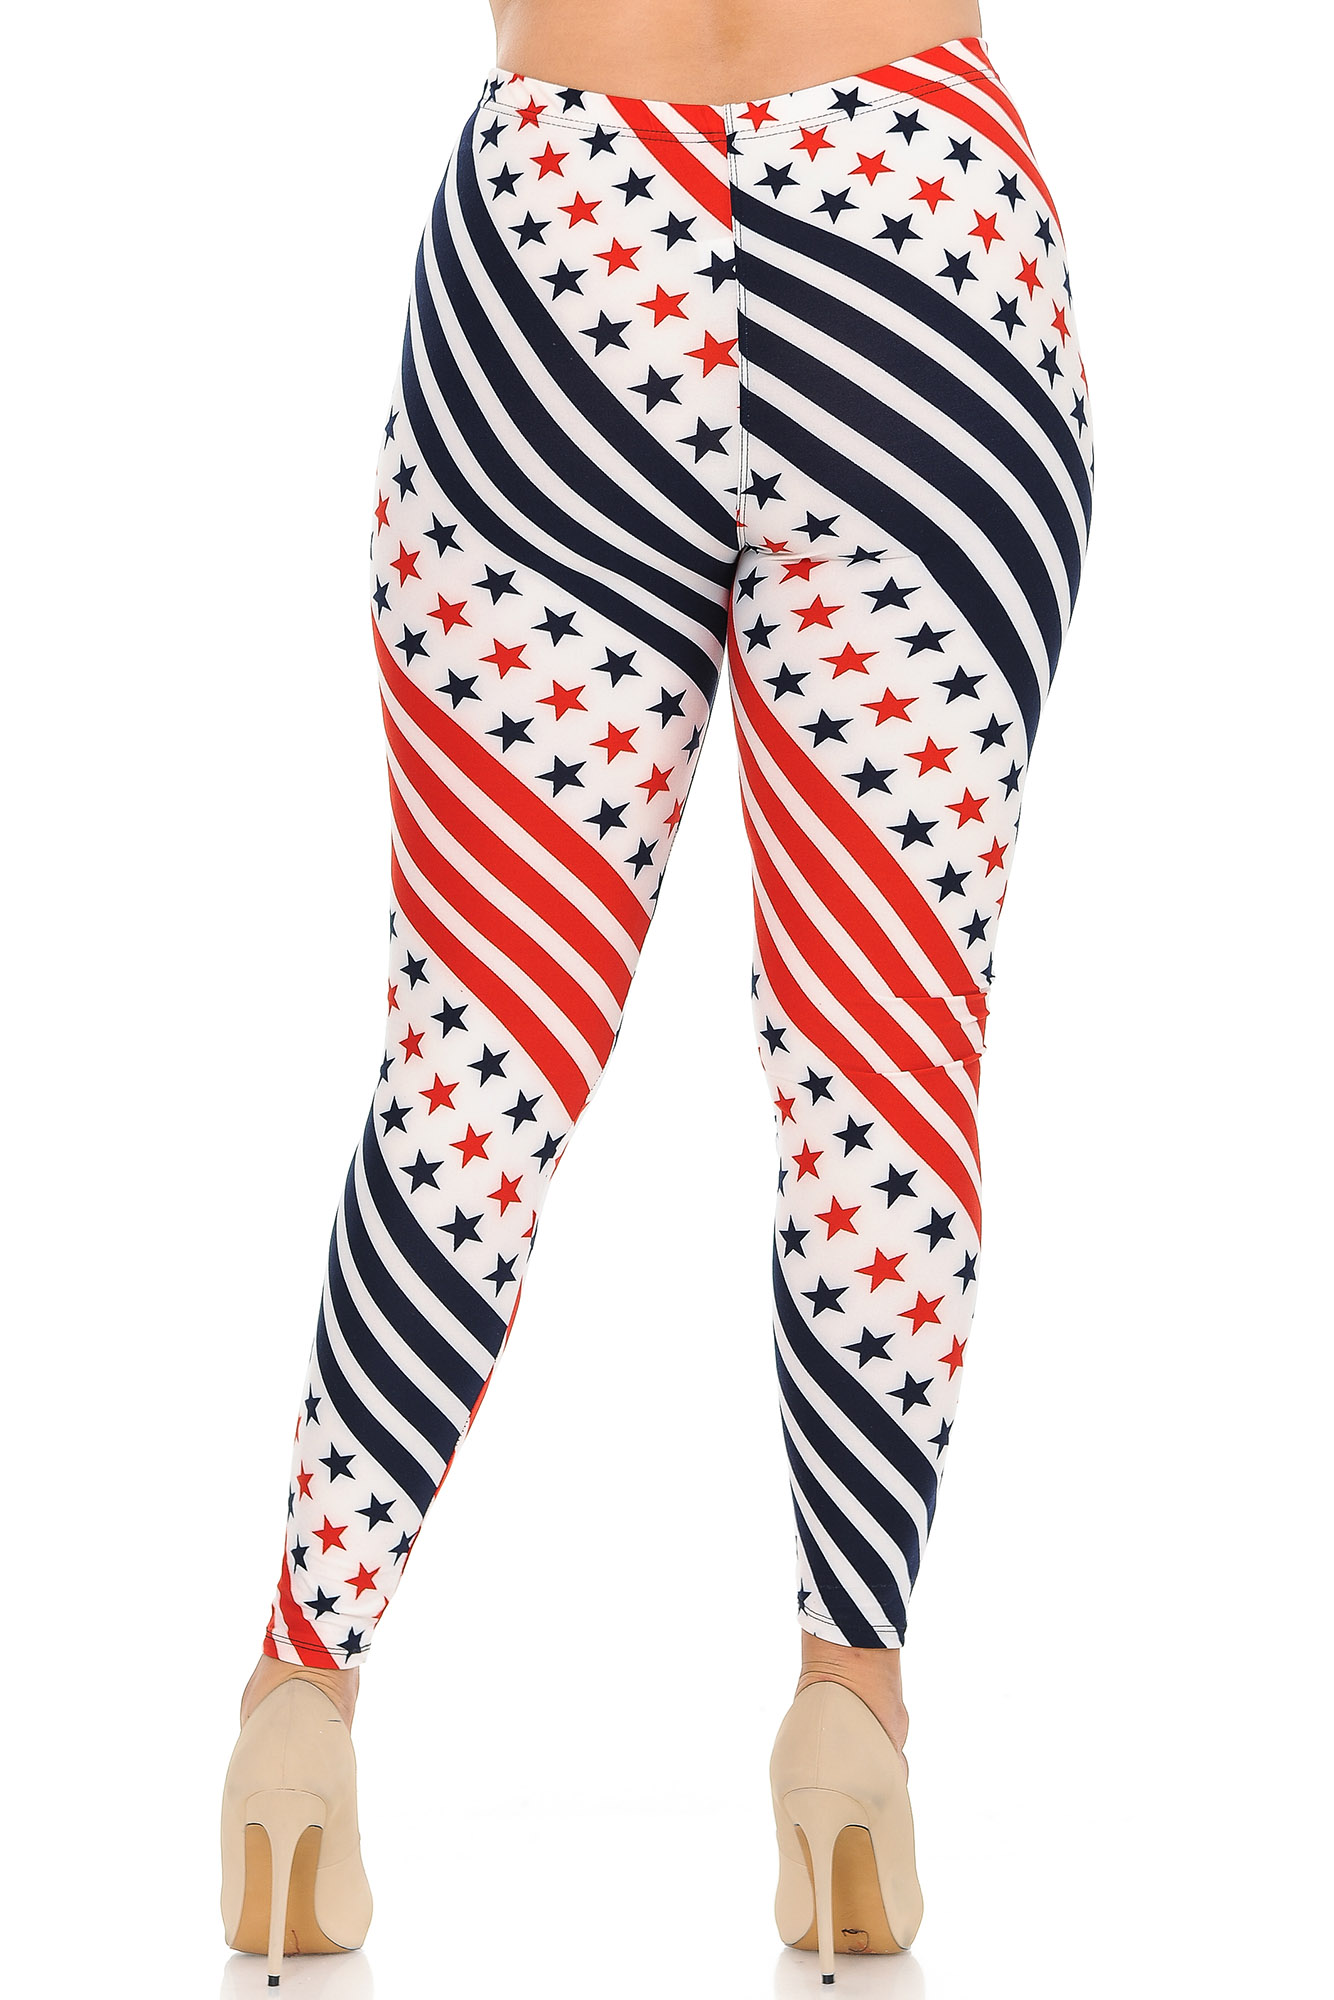 Wholesale Buttery Smooth Twirling Stars and Stripes USA Flag Plus Size Leggings